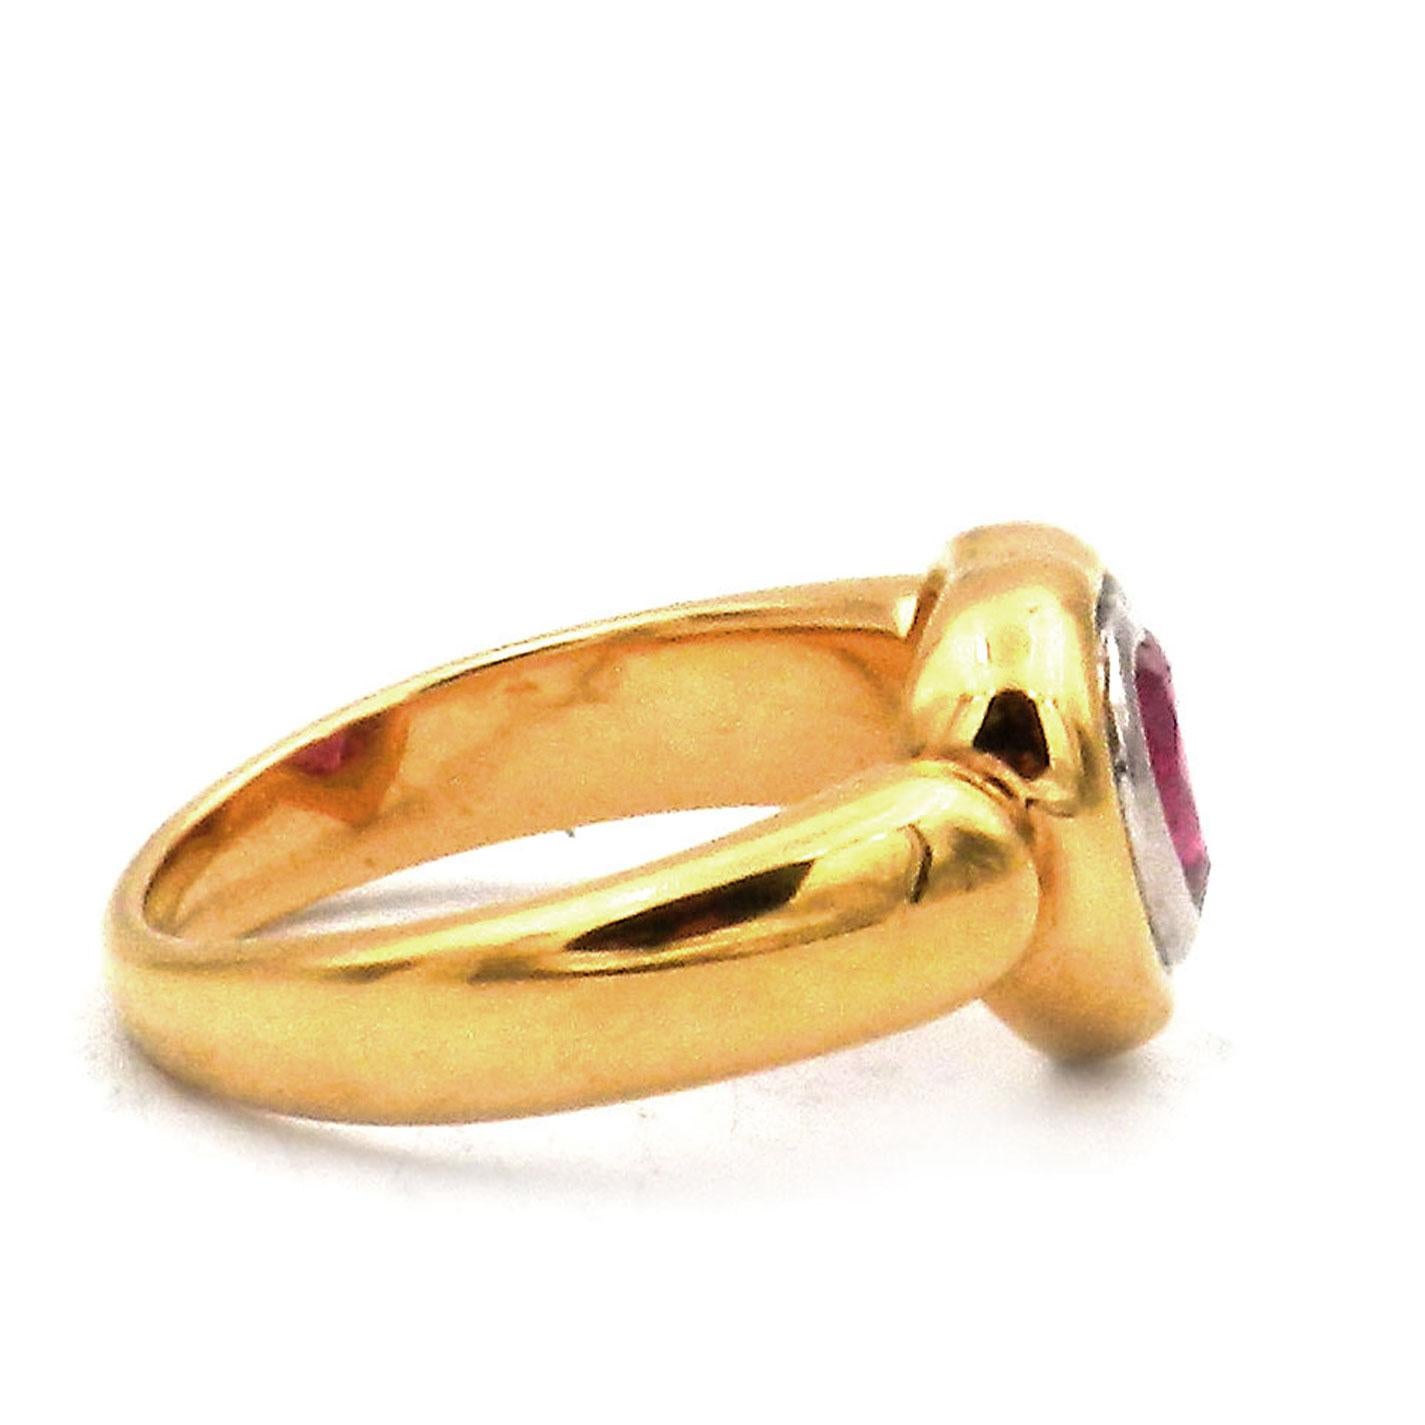 Certified Heart Shaped 1.3 Ct No Heat Ruby 18 K Yellow Gold Ring In Good Condition For Sale In Goettingen, DE